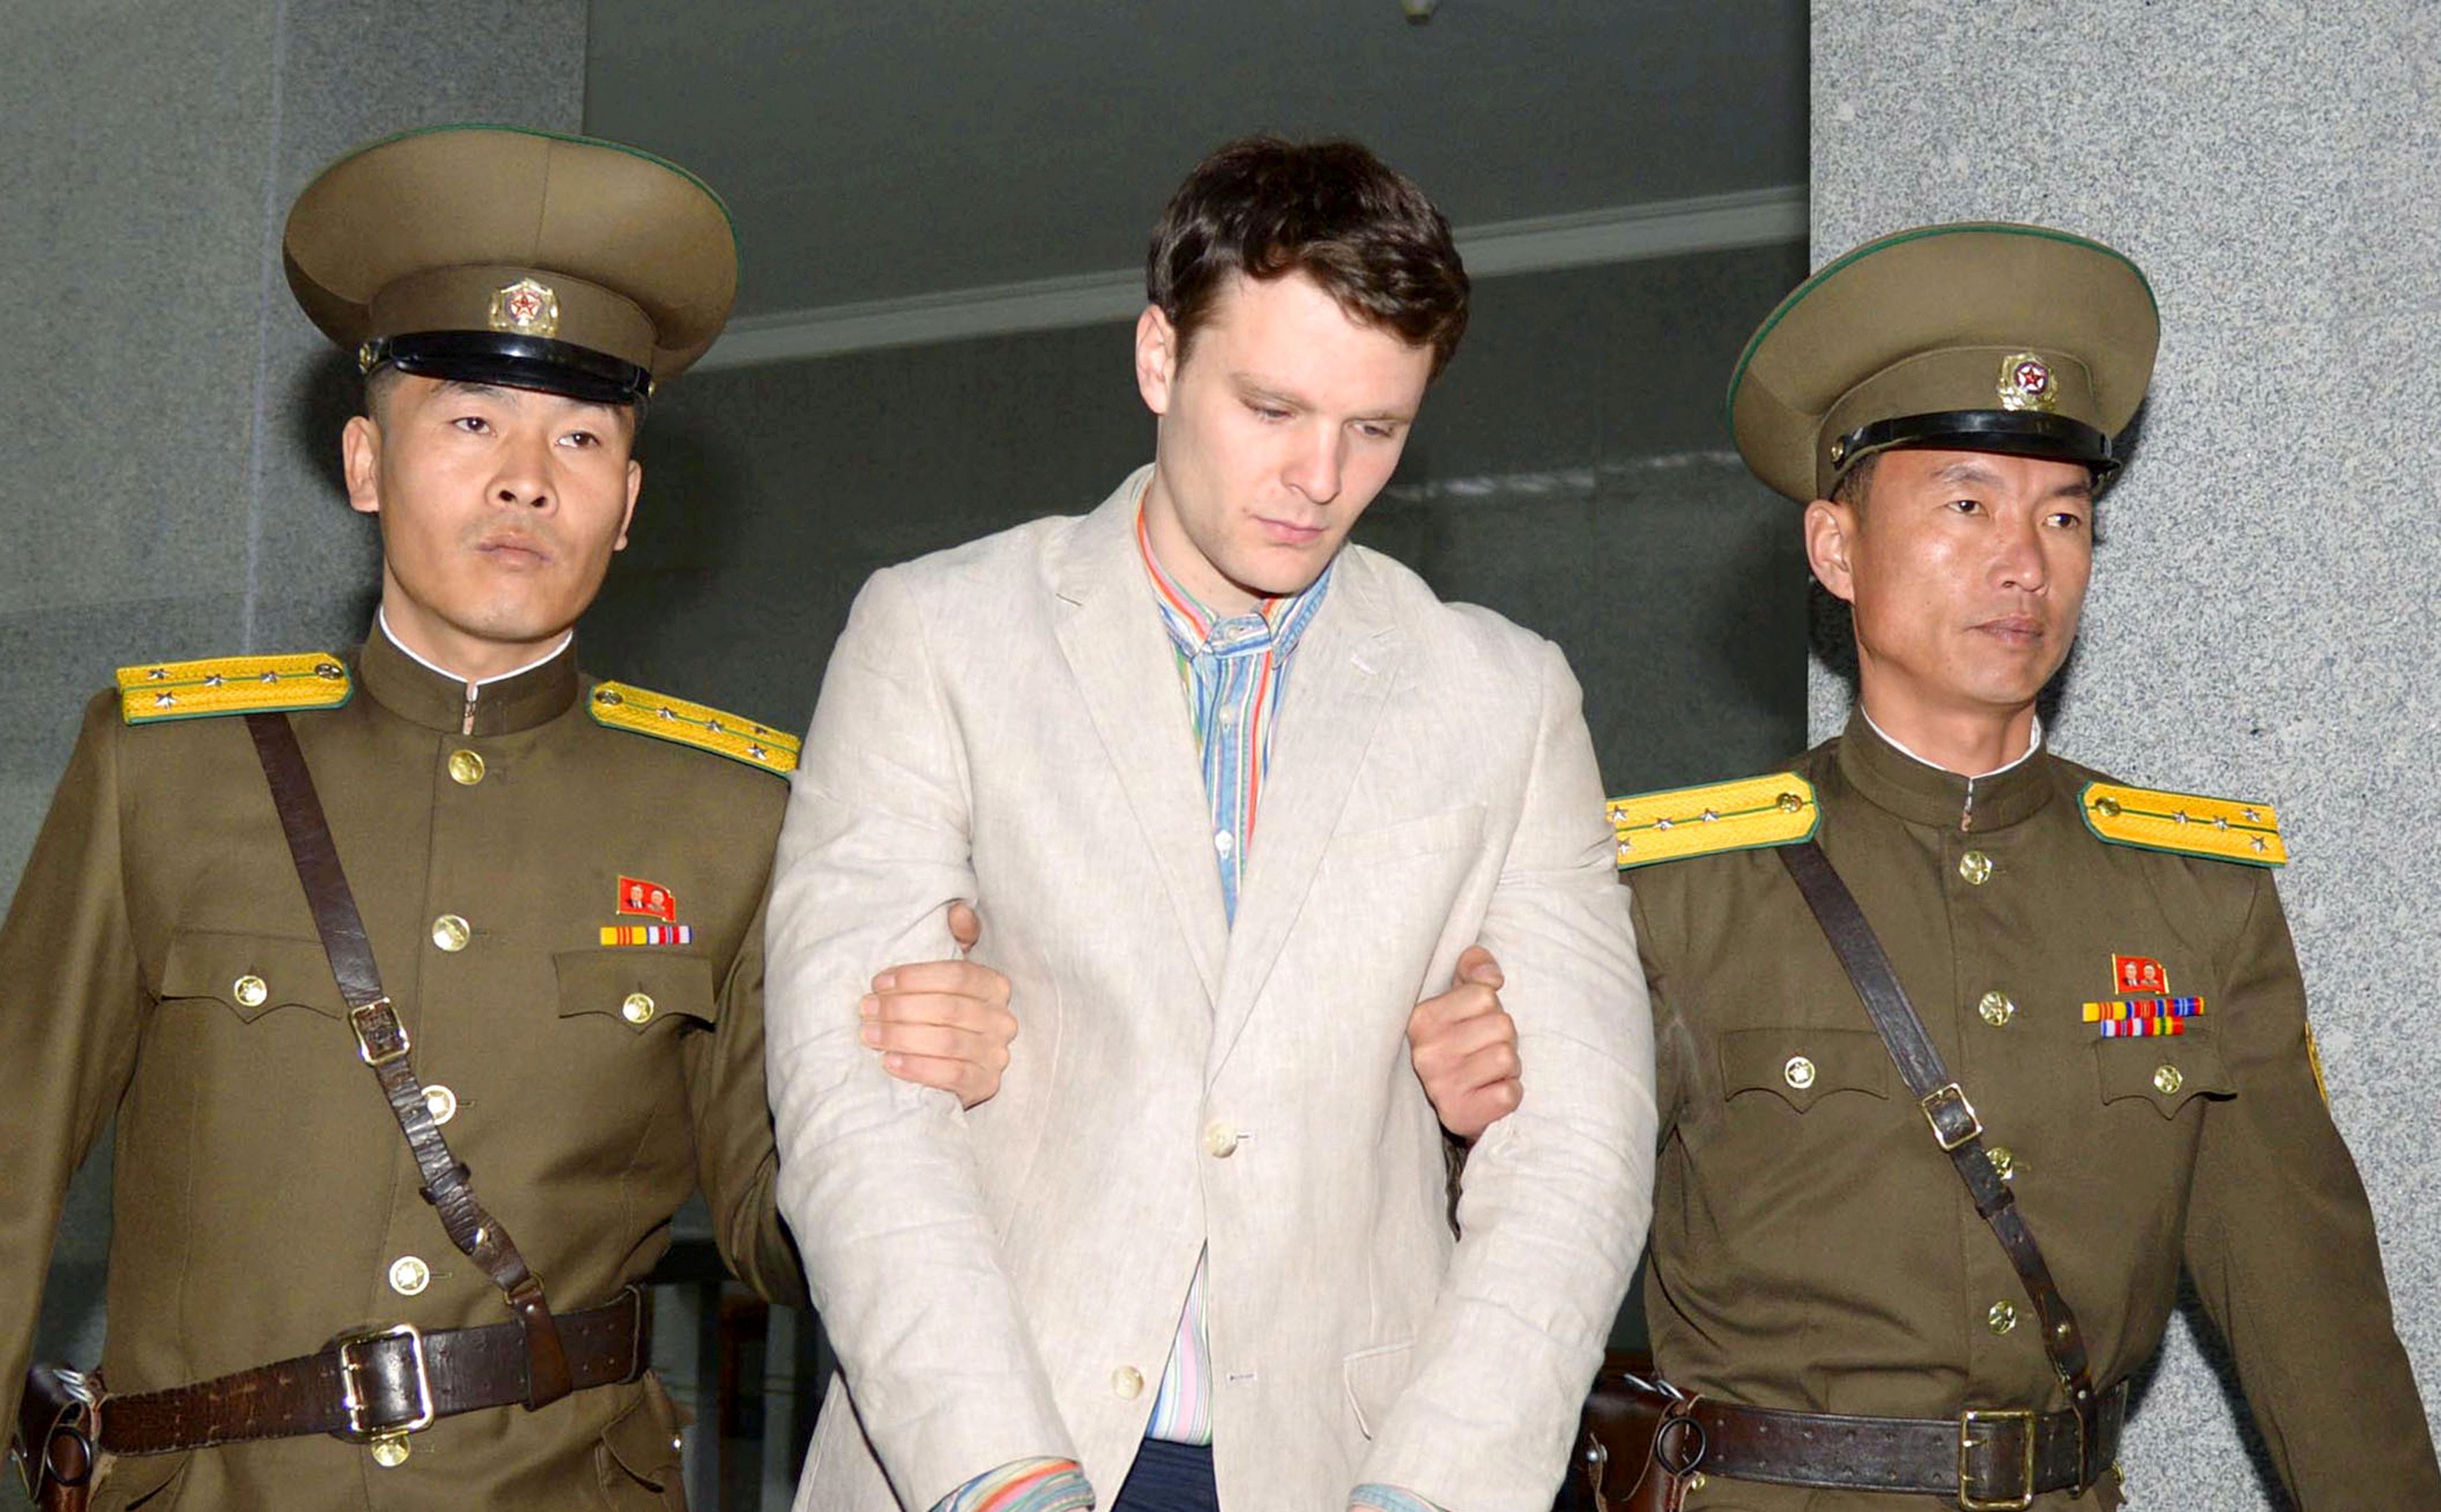 The student was hailed by Donald Trump as a catalyst for his summit with Kim Jong-un. But what really happened between the 21-year-old’s trial and his return home with brain damage, and was the truth held hostage for political ends?